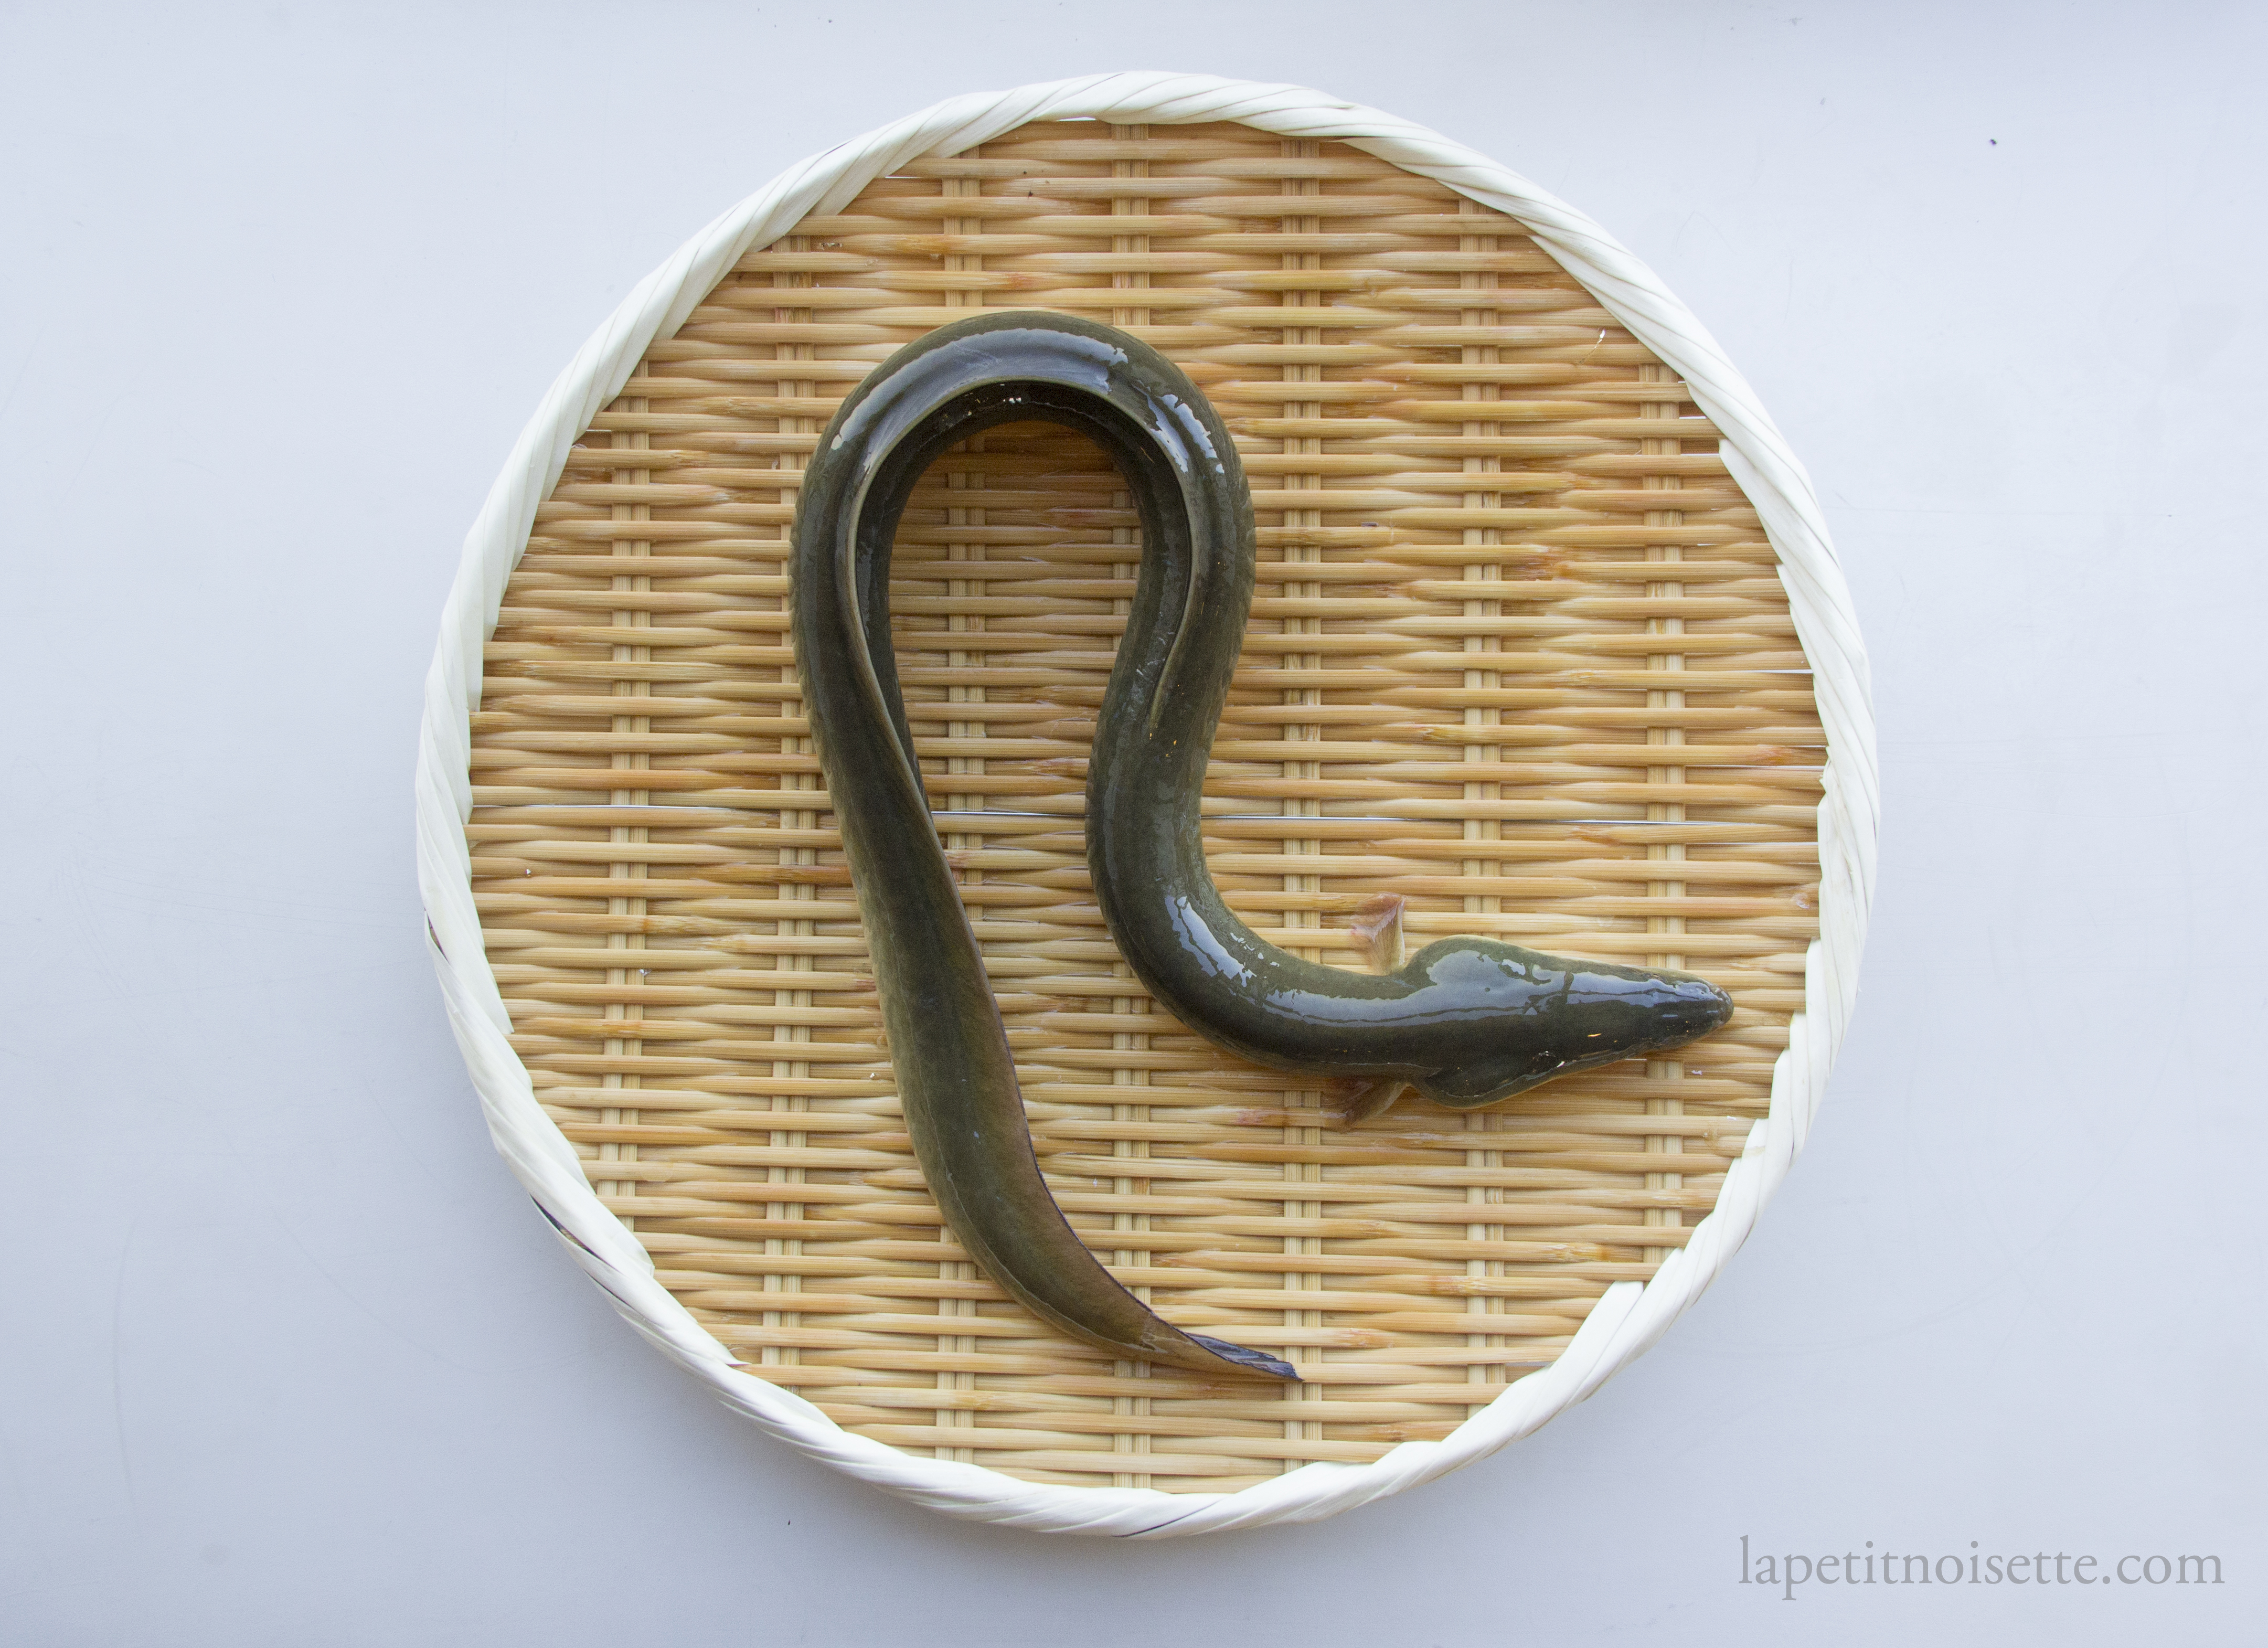 A wild Japanese eel for cooking.